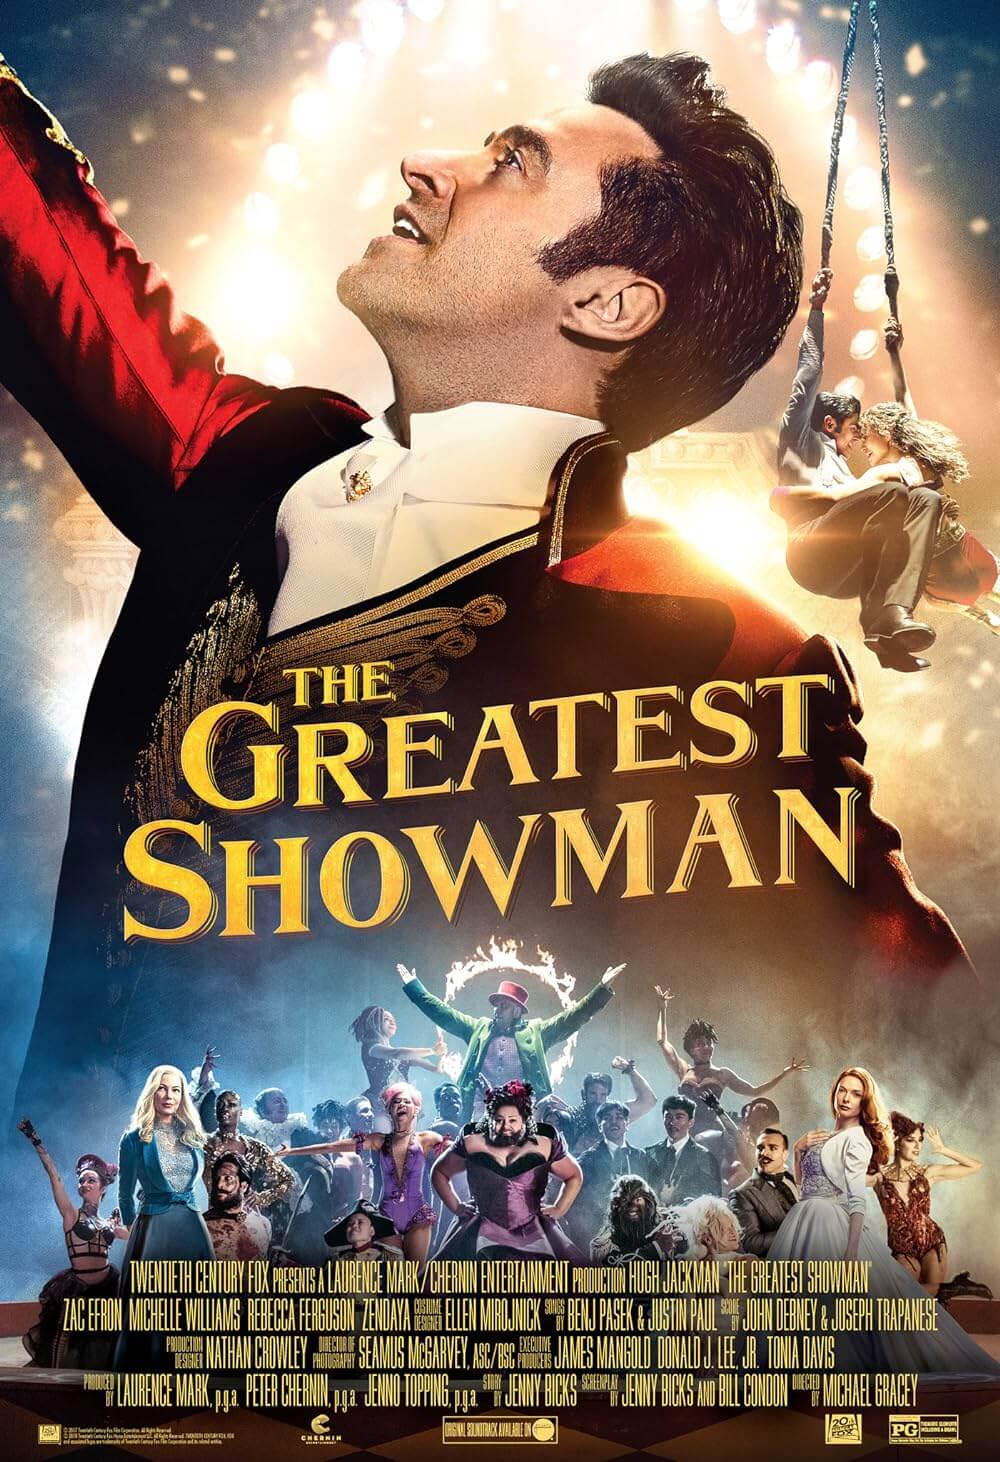 The Greatest Showman movie Poster